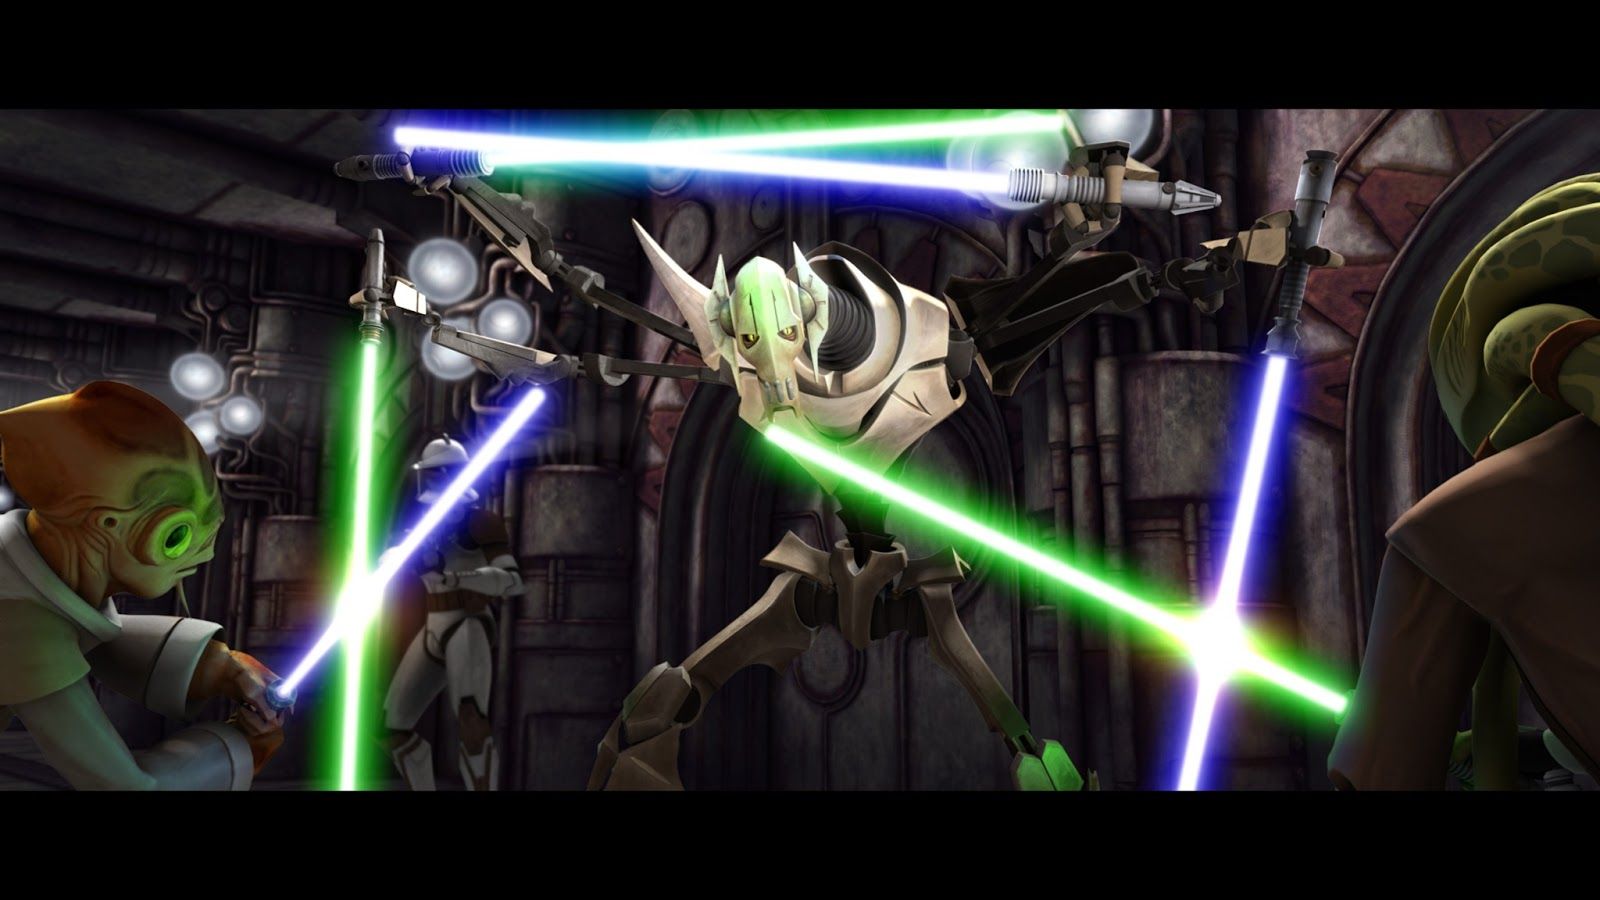 Kit Fisto And The Lair Of Grievous .scribbles World.blogspot.com